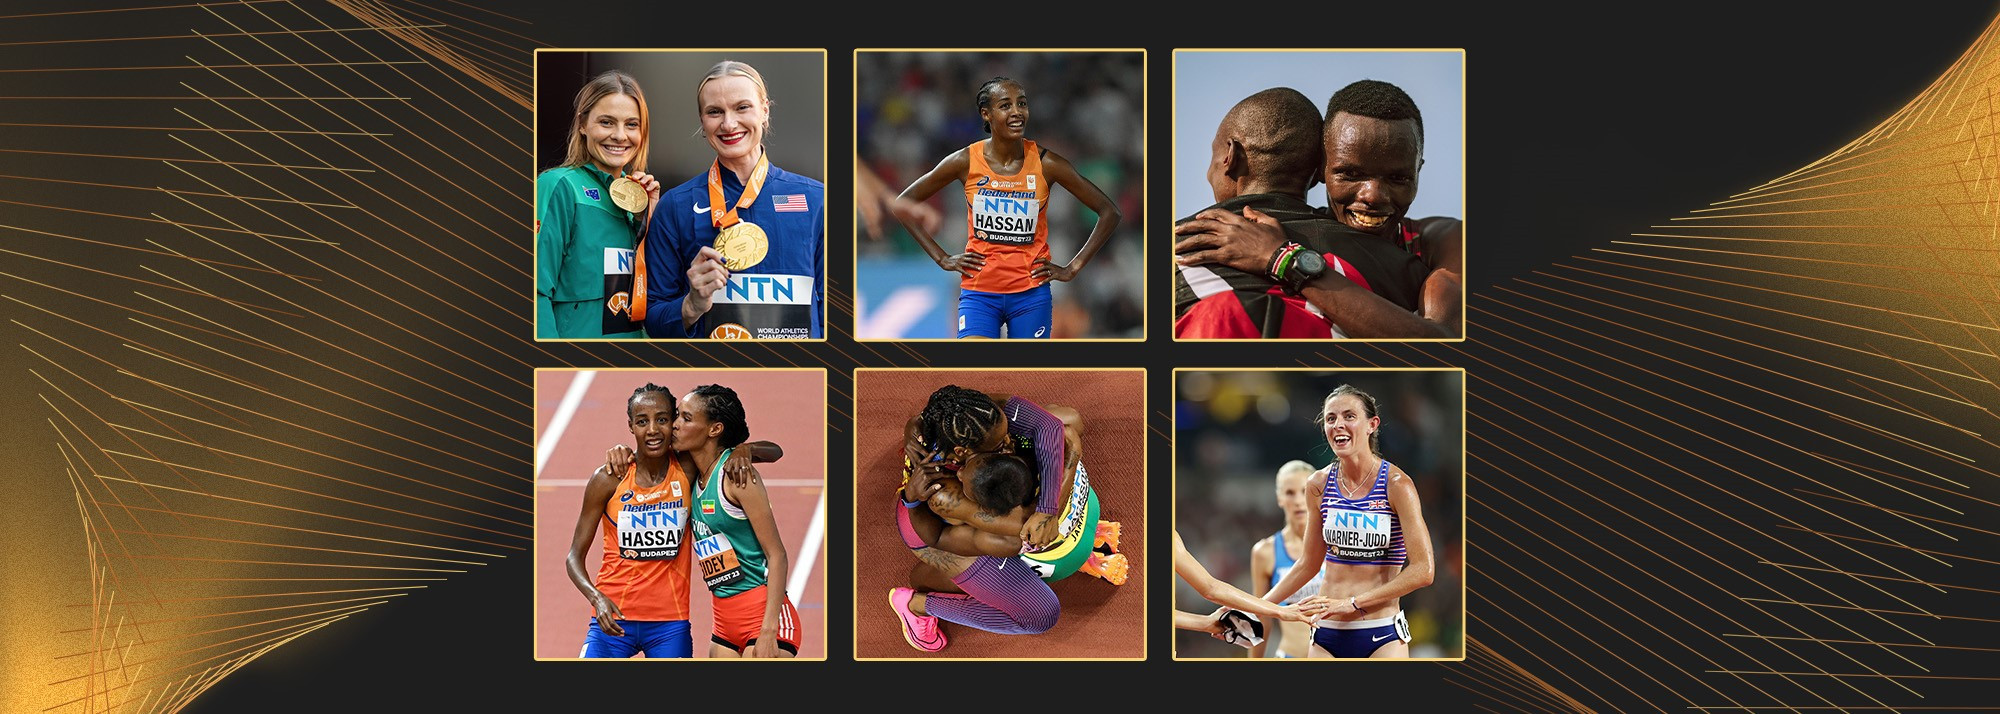 World Athletics shortlist for International Fair Play Award dominated by Budapest 2023 moments